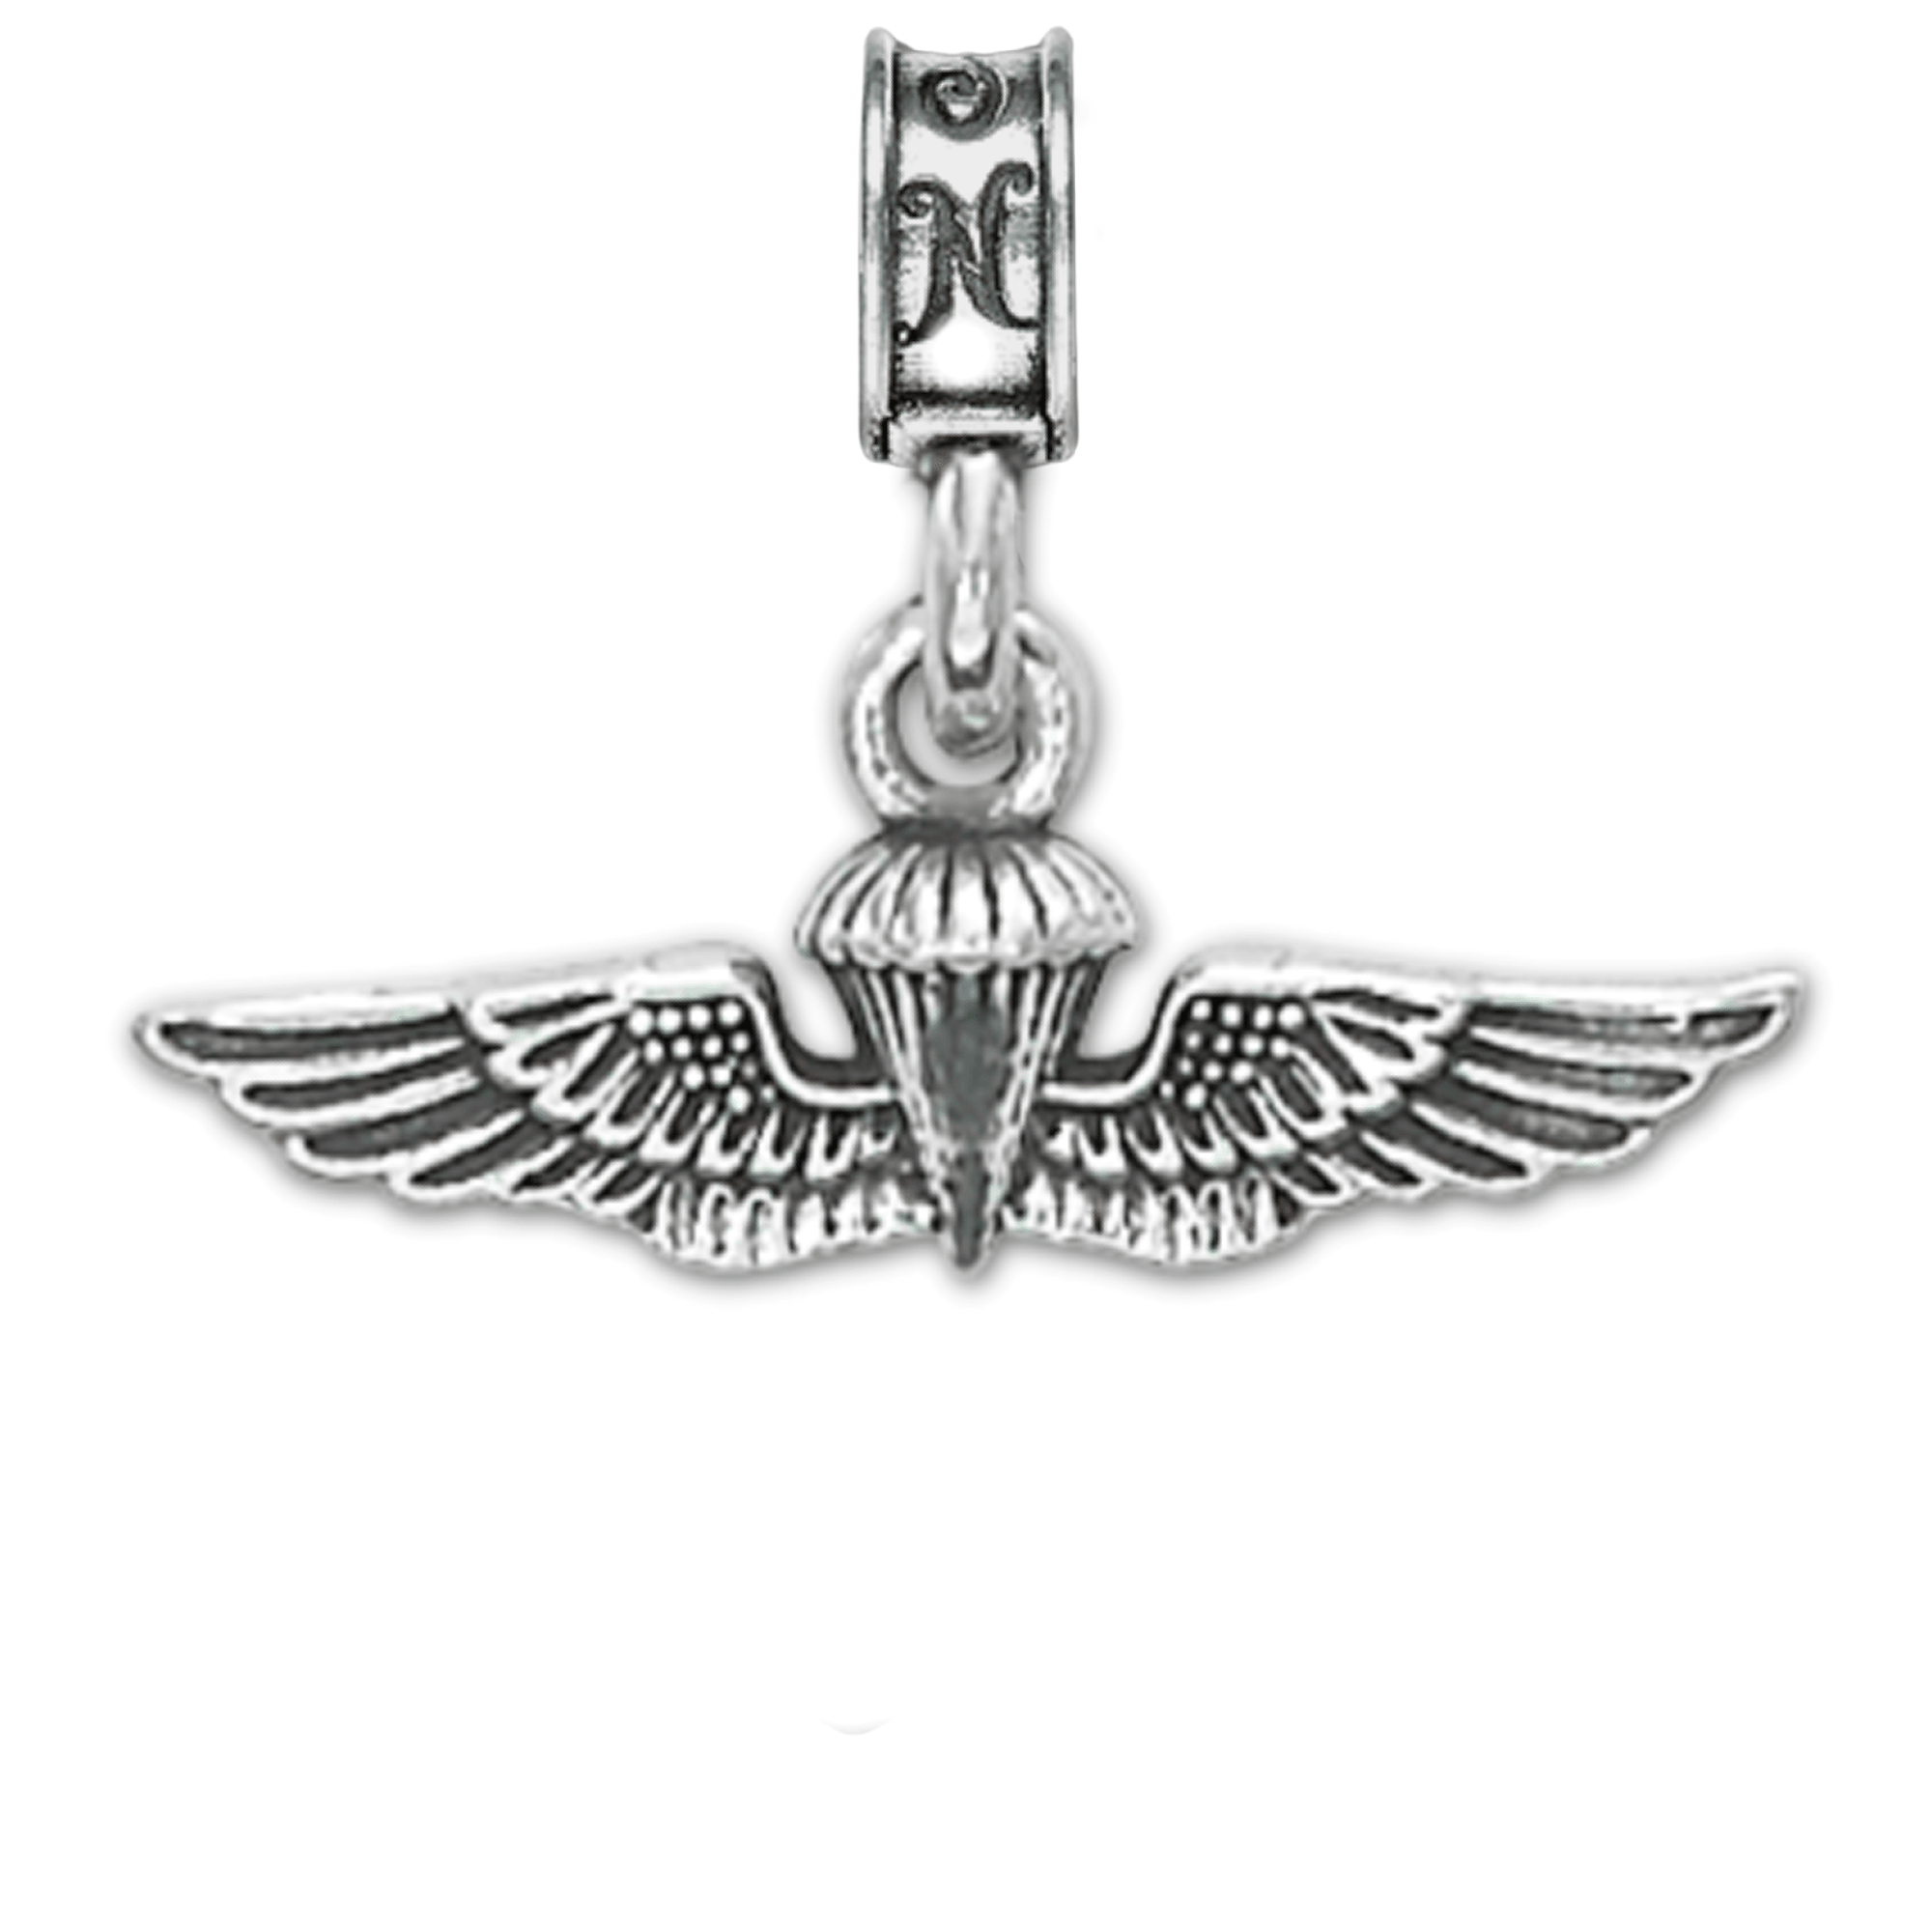 Military Jewelry, Military Charms, Navy, USN, Military Gifts, Navy Parachutist Charm